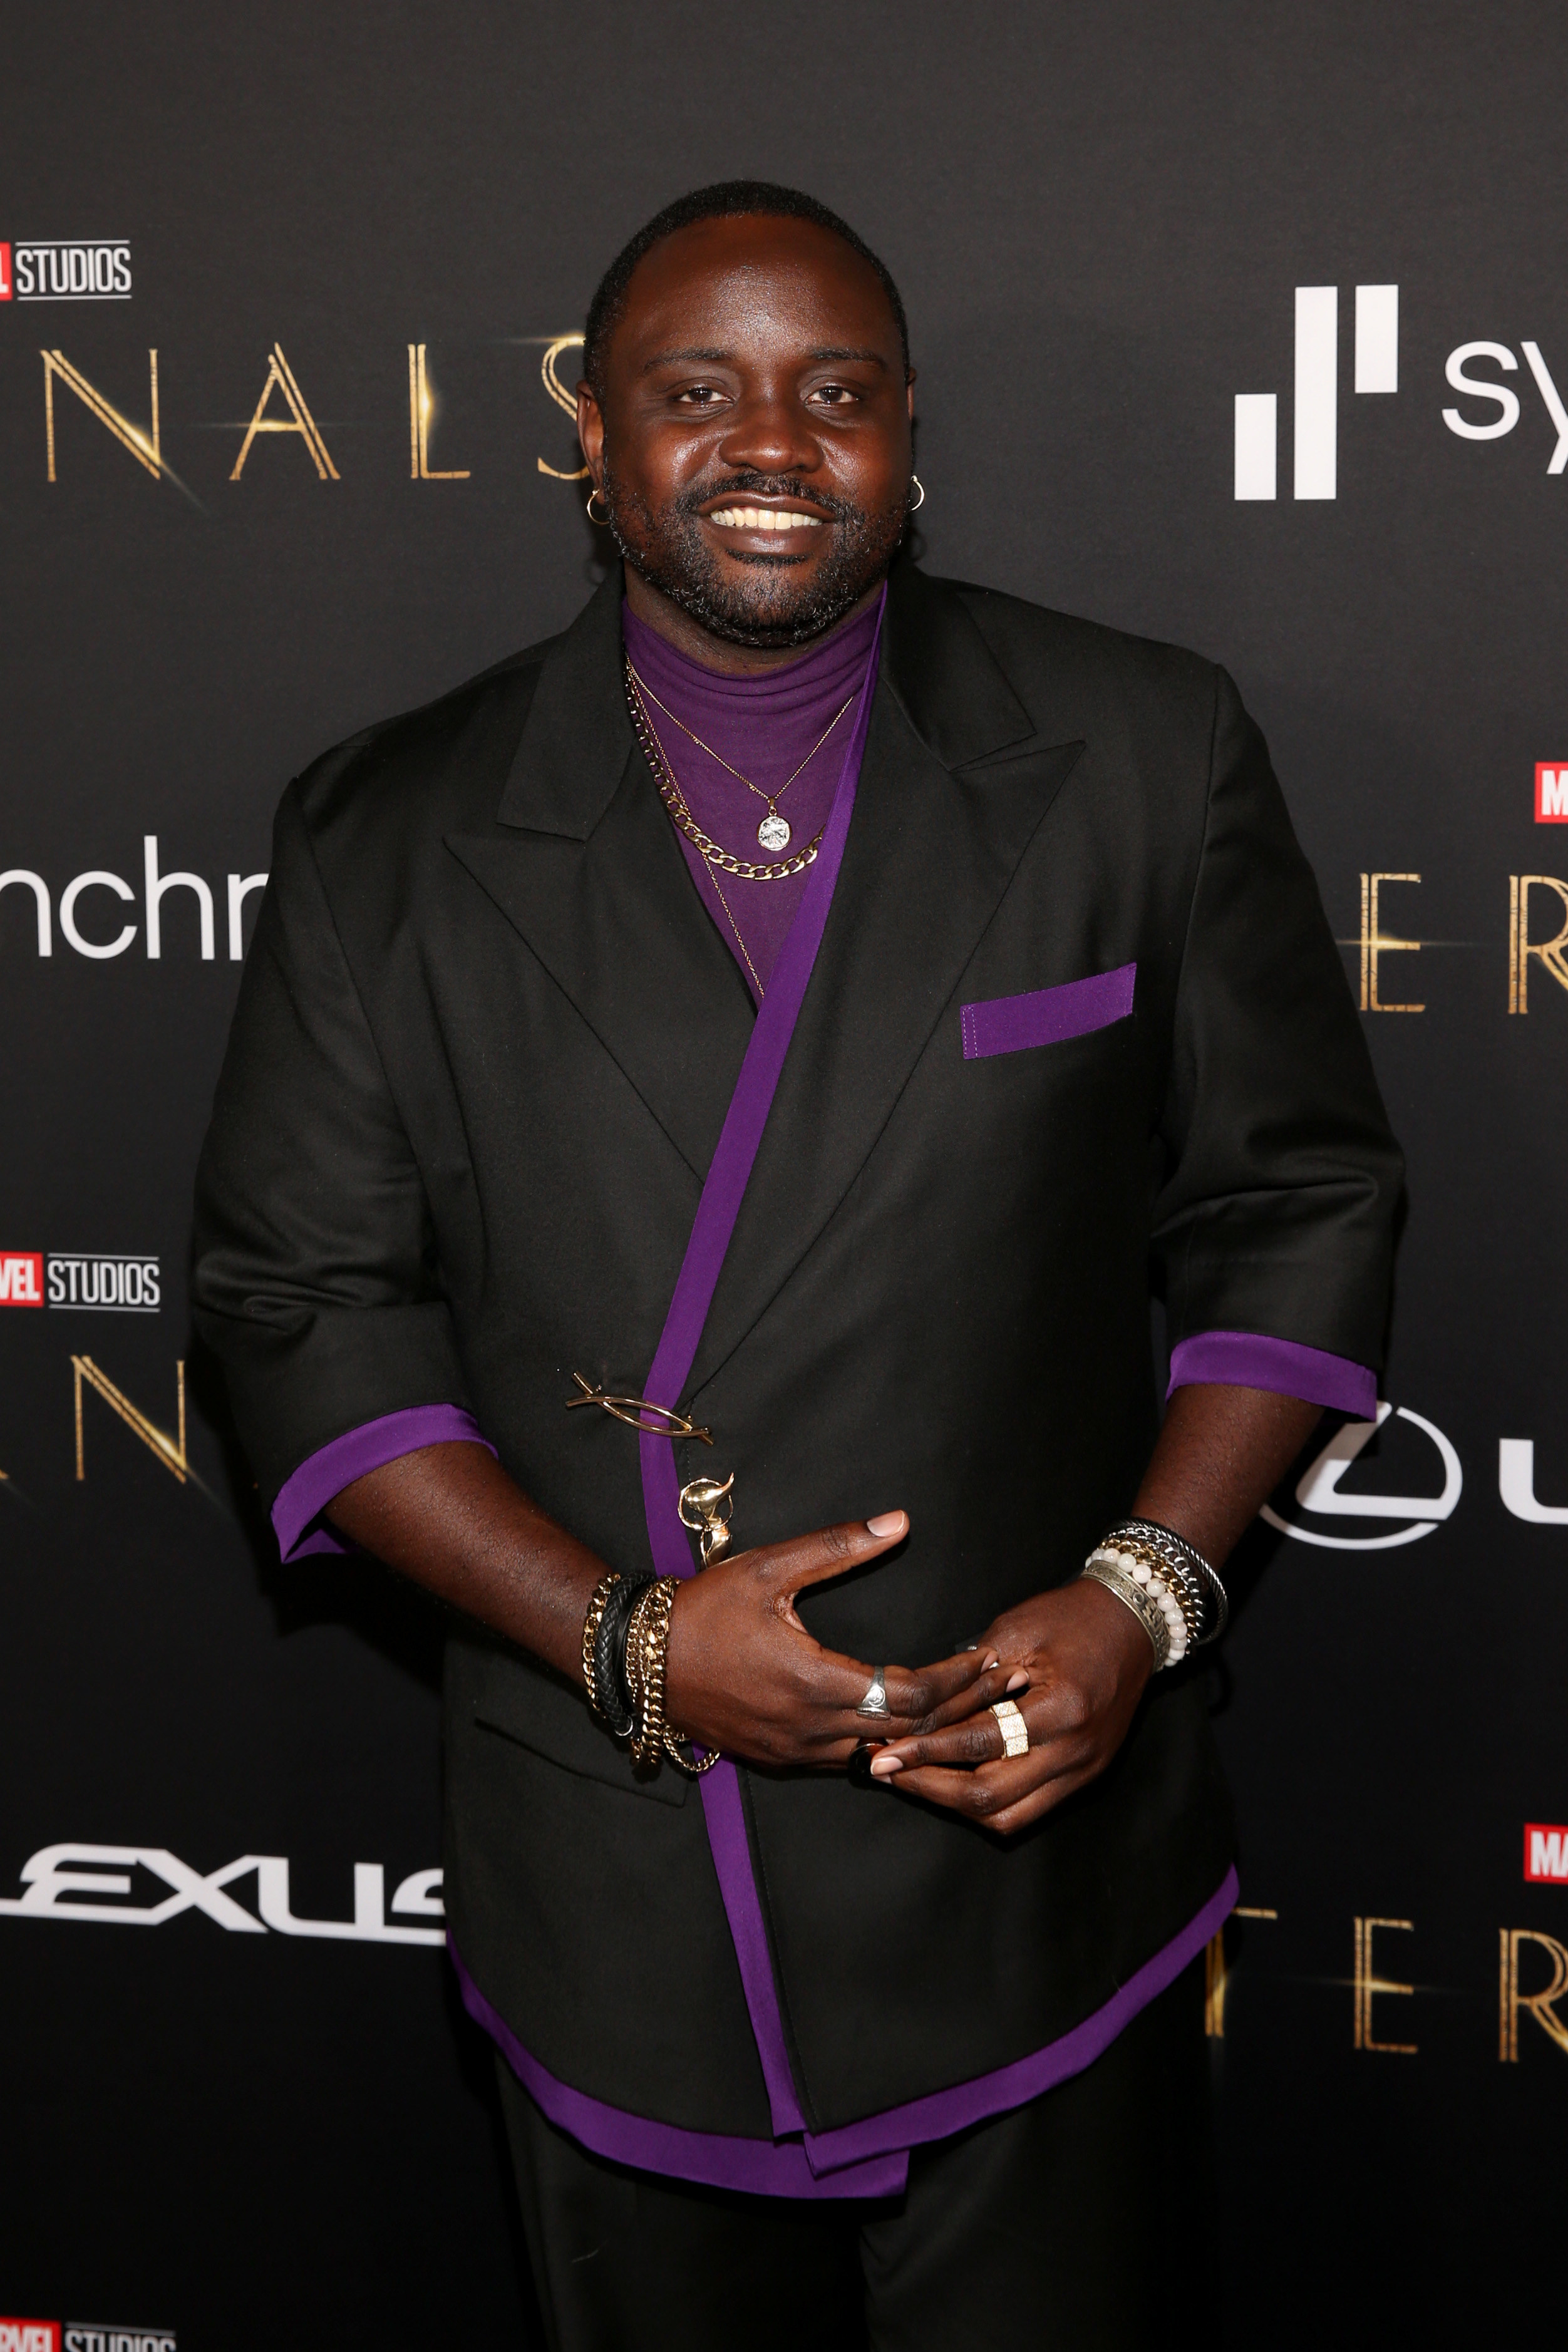 Brian Tyree Henry smiling.